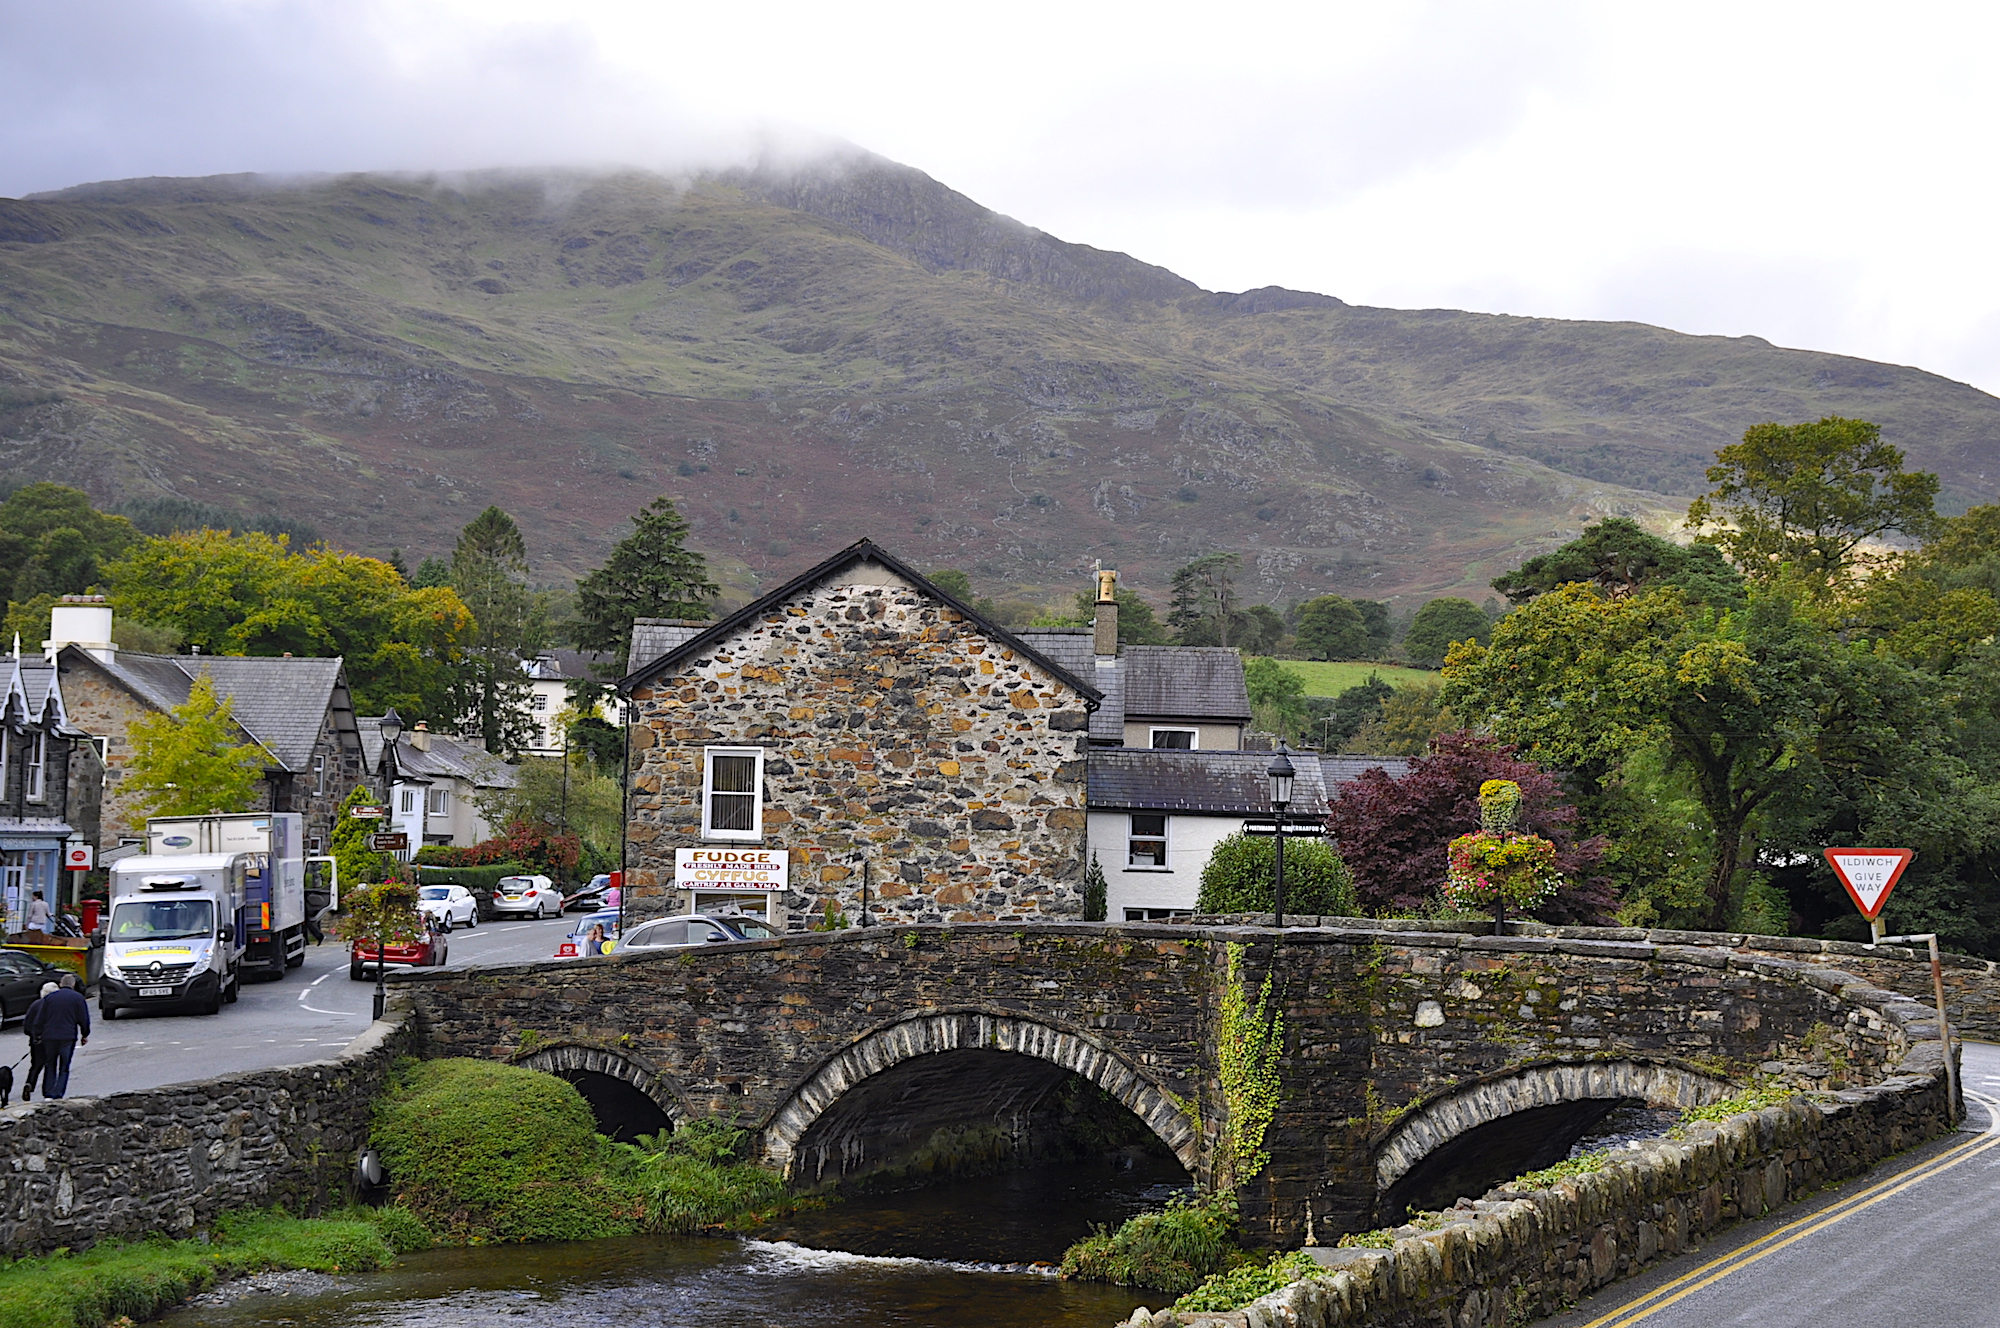 Beddgelert is divided by two beautiful rivers and old stone bridges.